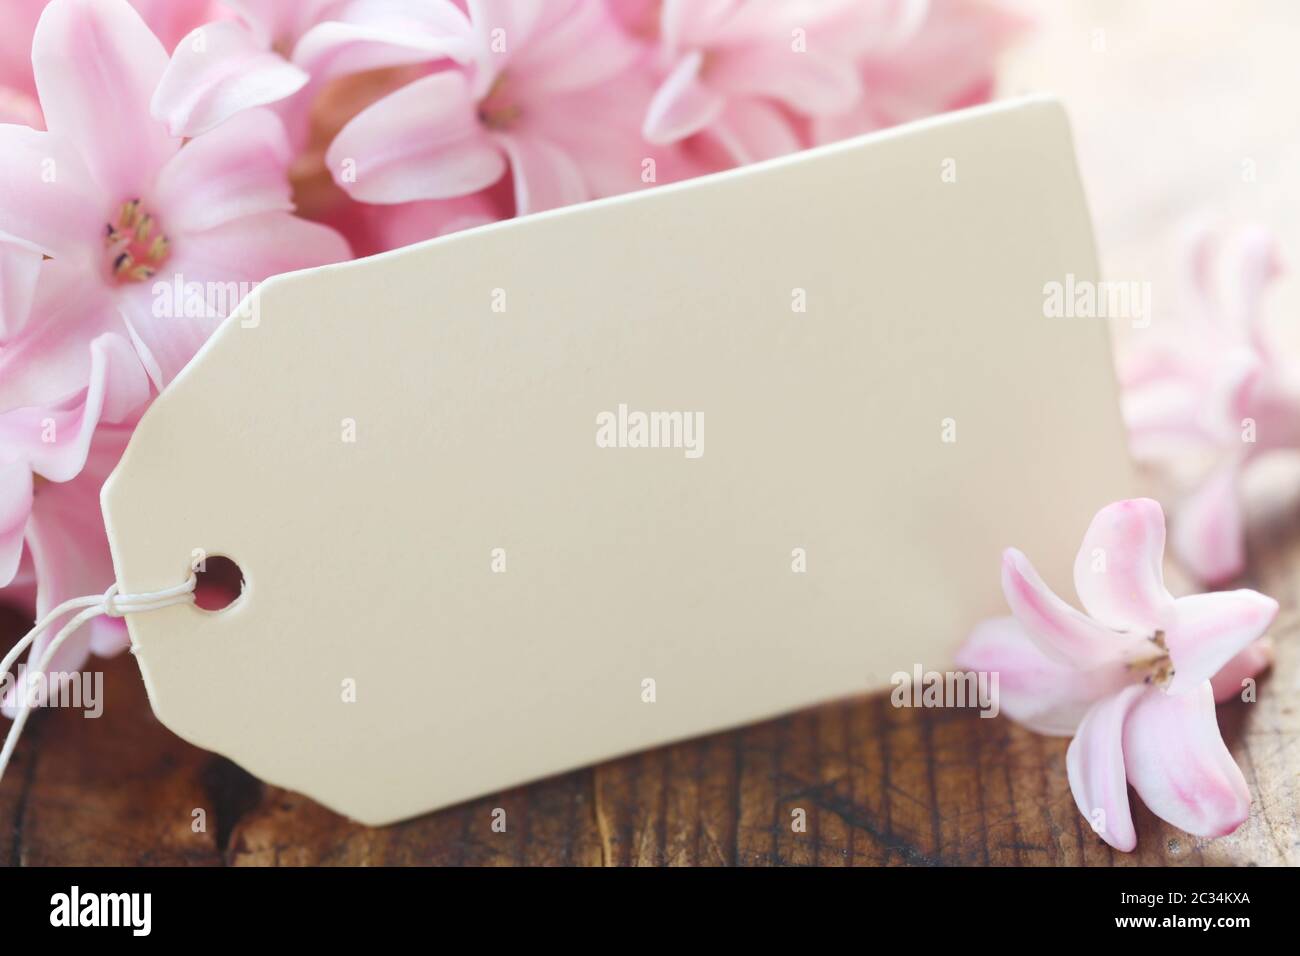 Pink Hyacinth With A Blank Paper Label Stock Photo